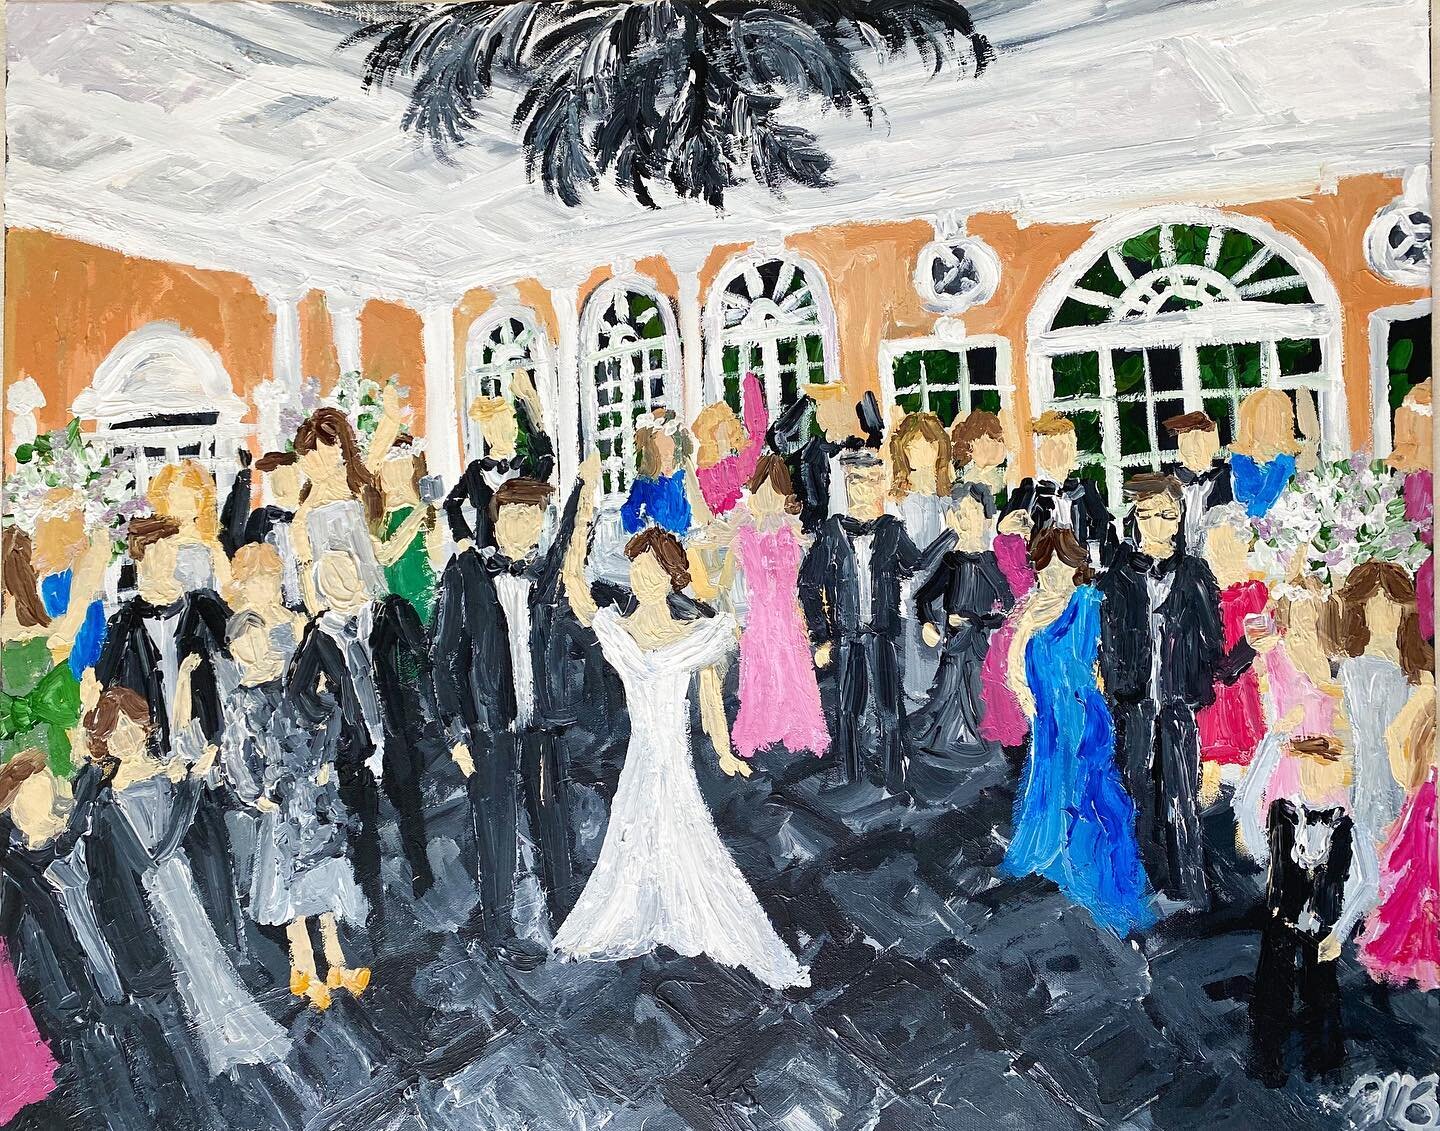 Live paintings are such a special experience for your guests to enjoy and for you to take home at the end of the night! 

Now booking for a few remaining dates in 2023 and for 2024! Email to get started🩵

Mattiebrowndesigns@gmail.com